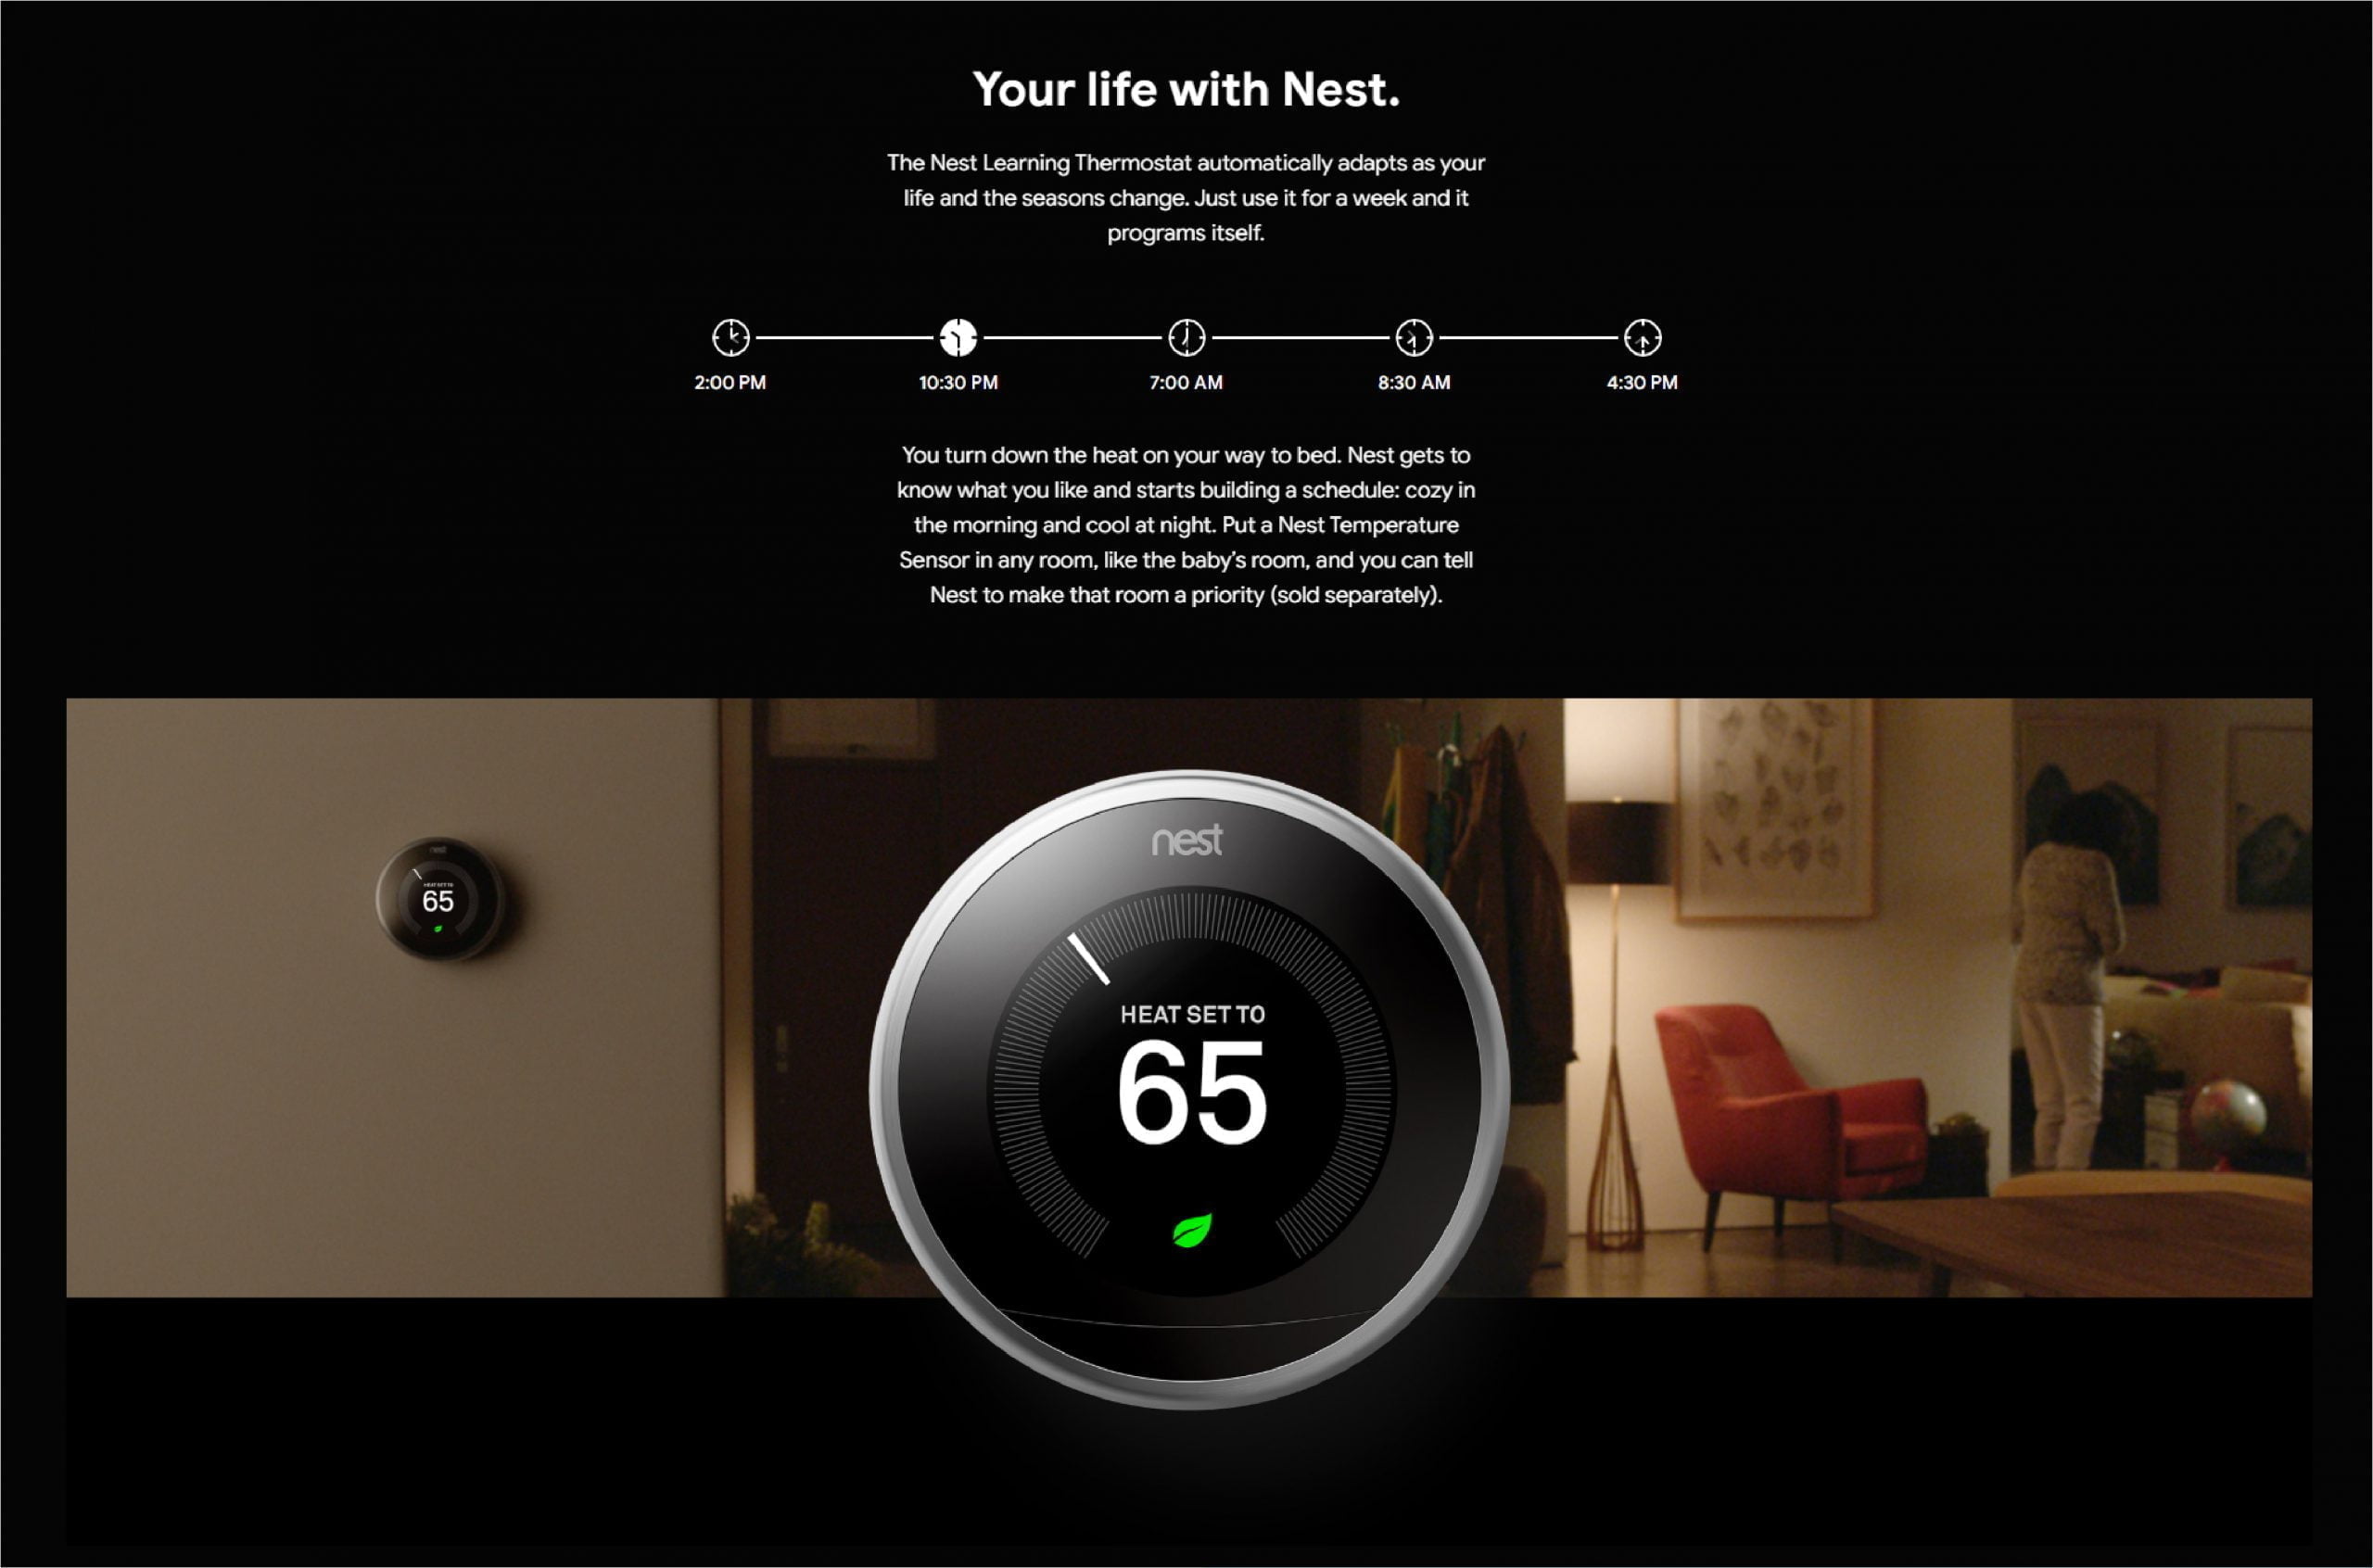 Nest 03 Scaled Google &Lt;H1&Gt;Google Nest Learning Smart Wifi Thermostat 3Rd Gen - T3018Us Mirror Black&Lt;/H1&Gt; &Lt;Ul Class=&Quot;A-Unordered-List A-Vertical A-Spacing-Mini&Quot;&Gt; &Lt;Li&Gt;&Lt;Span Class=&Quot;A-List-Item&Quot;&Gt;Auto-Schedule: No More Confusing Programming. It Learns The Temperatures You Like And Programs Itself.&Lt;/Span&Gt;&Lt;/Li&Gt; &Lt;Li&Gt;&Lt;Span Class=&Quot;A-List-Item&Quot;&Gt;Wi-Fi Thermostat: Connect The Nest Thermostat To Wi-Fi To Change The Temperature From Your Phone, Tablet Or Laptop.&Lt;/Span&Gt;&Lt;/Li&Gt; &Lt;Li&Gt;&Lt;Span Class=&Quot;A-List-Item&Quot;&Gt;Energy Saving: You’ll See The Nest Leaf When You Choose A Temperature That Saves Energy. It Guides You In The Right Direction.&Lt;/Span&Gt;&Lt;/Li&Gt; &Lt;Li&Gt;&Lt;Span Class=&Quot;A-List-Item&Quot;&Gt;Smart Thermostat: Early-On Nest Learns How Your Home Warms Up And Keeps An Eye On The Weather To Get You The Temperature You Want When You Want It.&Lt;/Span&Gt;&Lt;/Li&Gt; &Lt;Li&Gt;&Lt;Span Class=&Quot;A-List-Item&Quot;&Gt;Home/Away Assist: The Nest Thermostat Automatically Turns Itself Down When You’re Away To Avoid Heating Or Cooling An Empty Home.&Lt;/Span&Gt;&Lt;/Li&Gt; &Lt;Li&Gt;&Lt;Span Class=&Quot;A-List-Item&Quot;&Gt;Works With Amazon Alexa For Voice Control (Alexa Device Sold Separately)&Lt;/Span&Gt;&Lt;/Li&Gt; &Lt;Li&Gt;&Lt;Span Class=&Quot;A-List-Item&Quot;&Gt;Auto-Schedule: Nest Learns The Temperatures You Like And Programs Itself In About A Week.&Lt;/Span&Gt; &Lt;H5&Gt;Note : Direct Replacement Warranty One Year&Lt;/H5&Gt; &Lt;Div Class=&Quot;Html-Fragment&Quot;&Gt; &Lt;Div&Gt; &Lt;B&Gt;We Also Provide International Wholesale And Retail Shipping To All Gcc Countries: Saudi Arabia, Qatar, Oman, Kuwait, Bahrain.&Lt;/B&Gt; &Lt;/Div&Gt; &Lt;/Div&Gt;&Lt;/Li&Gt; &Lt;/Ul&Gt; &Lt;Div Class=&Quot;A-Row A-Expander-Container A-Expander-Inline-Container&Quot; Aria-Live=&Quot;Polite&Quot;&Gt; &Lt;Div Class=&Quot;A-Expander-Content A-Expander-Extend-Content A-Expander-Content-Expanded&Quot; Aria-Expanded=&Quot;True&Quot;&Gt;&Lt;/Div&Gt; &Lt;/Div&Gt; Thermostat Google Nest Learning Smart Wifi Thermostat 3Rd Gen - T3018Us Mirror Black